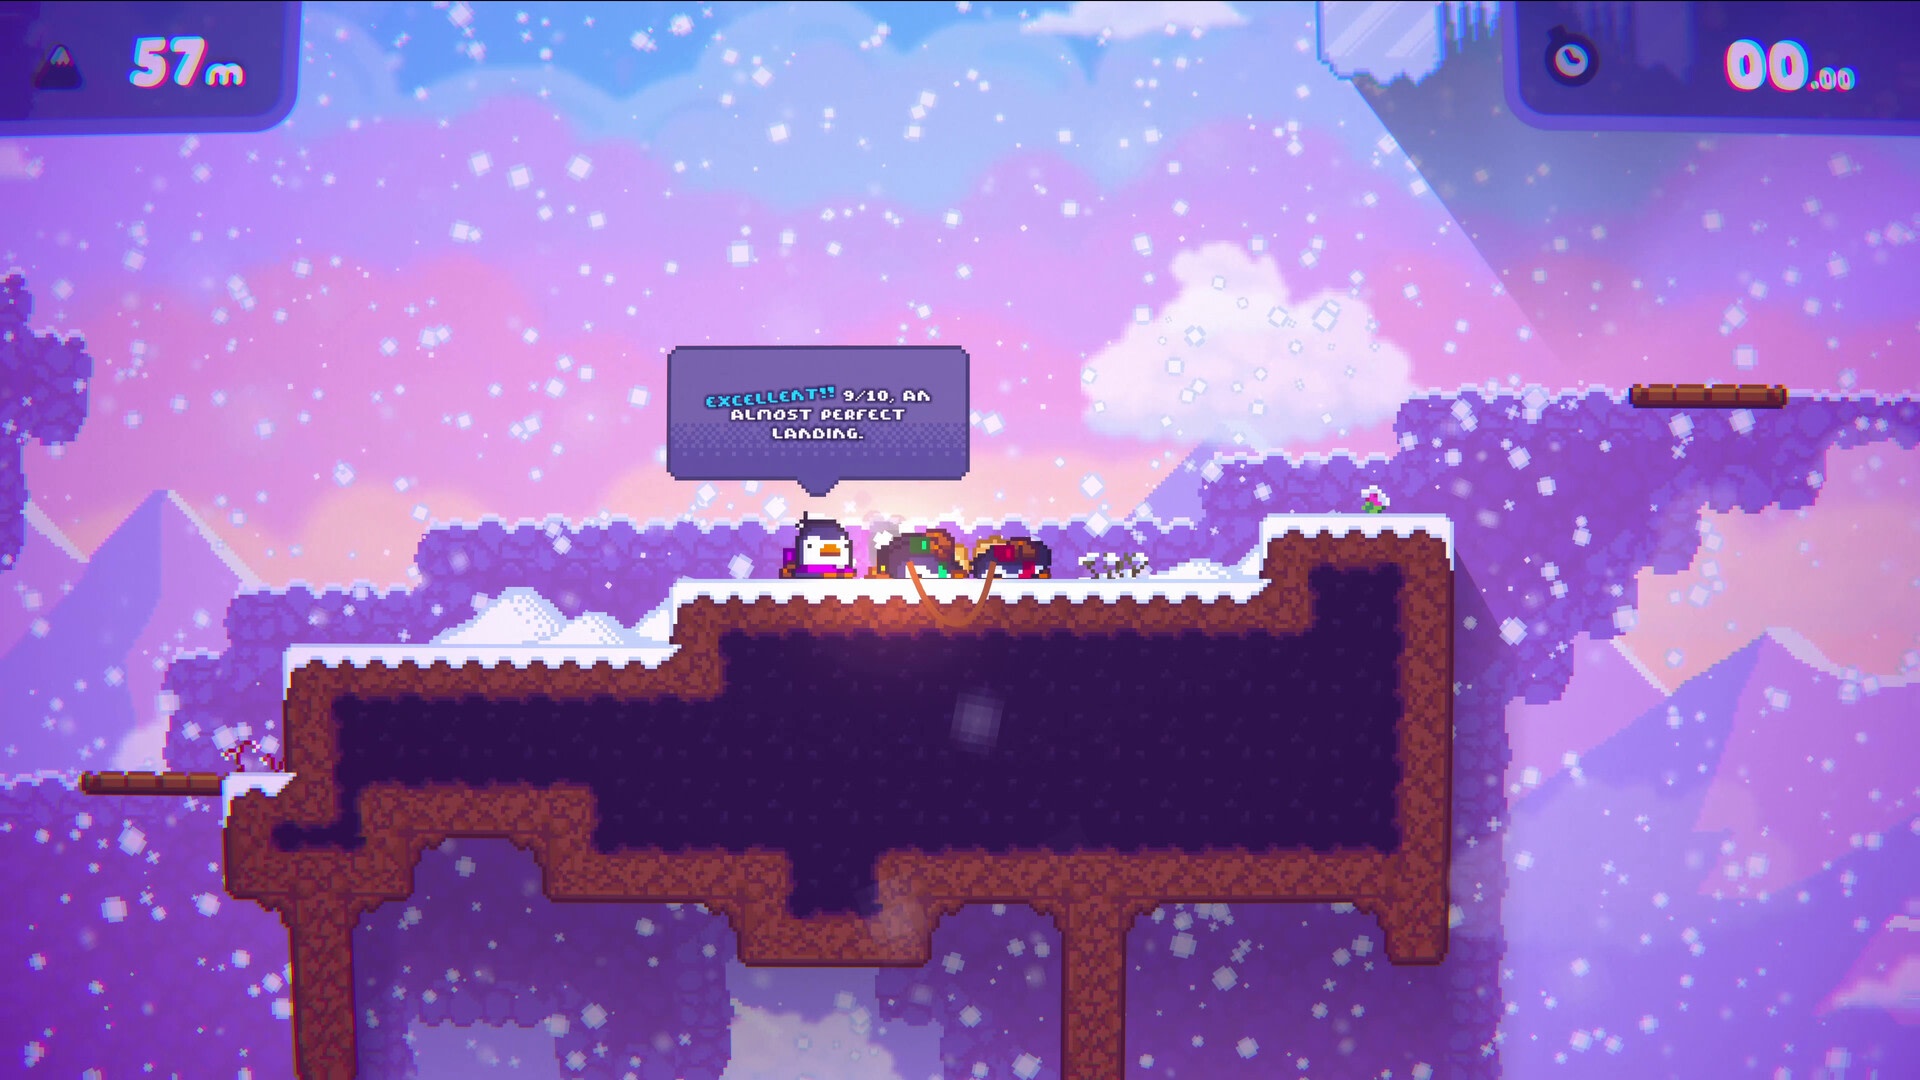 (Every time we fail a jump, we end up with our beaks in the snow.)